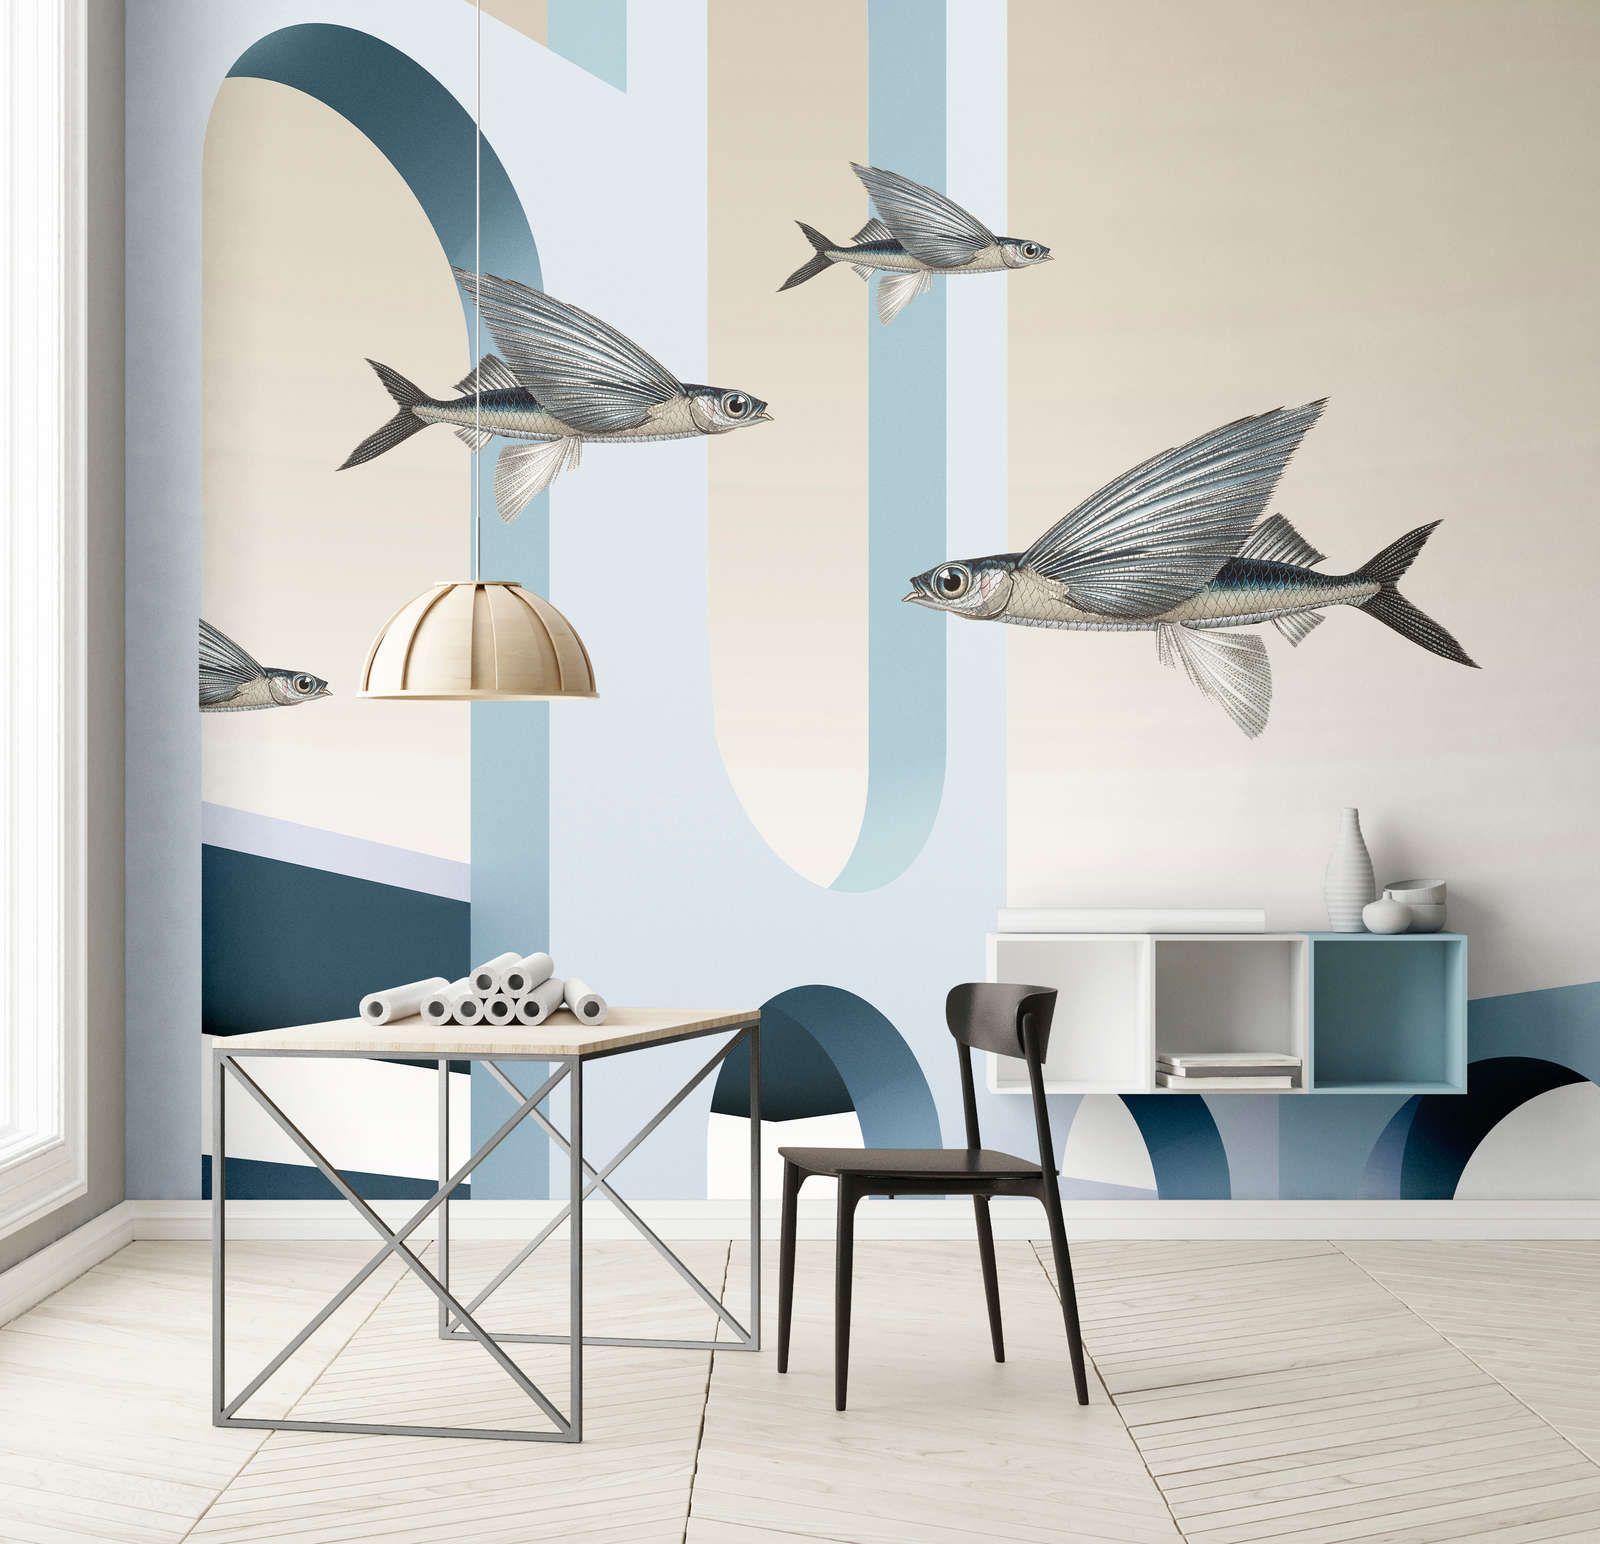             styx - Photo wallpaper with abstract 3D architecture and flying fish - matt, smooth non-woven fabric
        